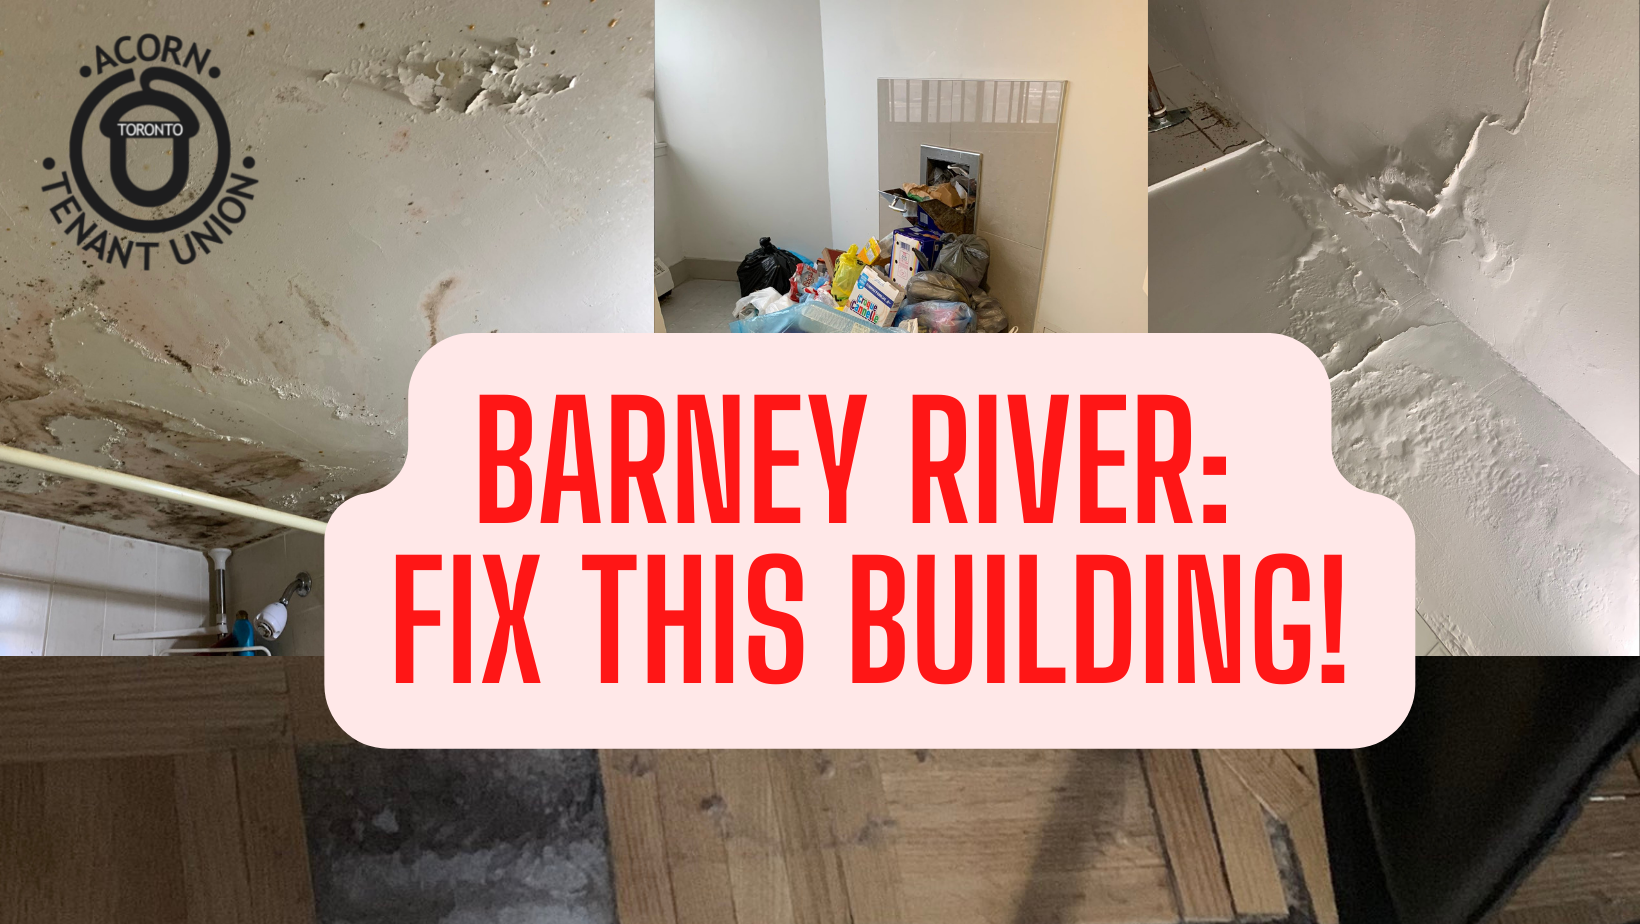 Barney river fix this building!